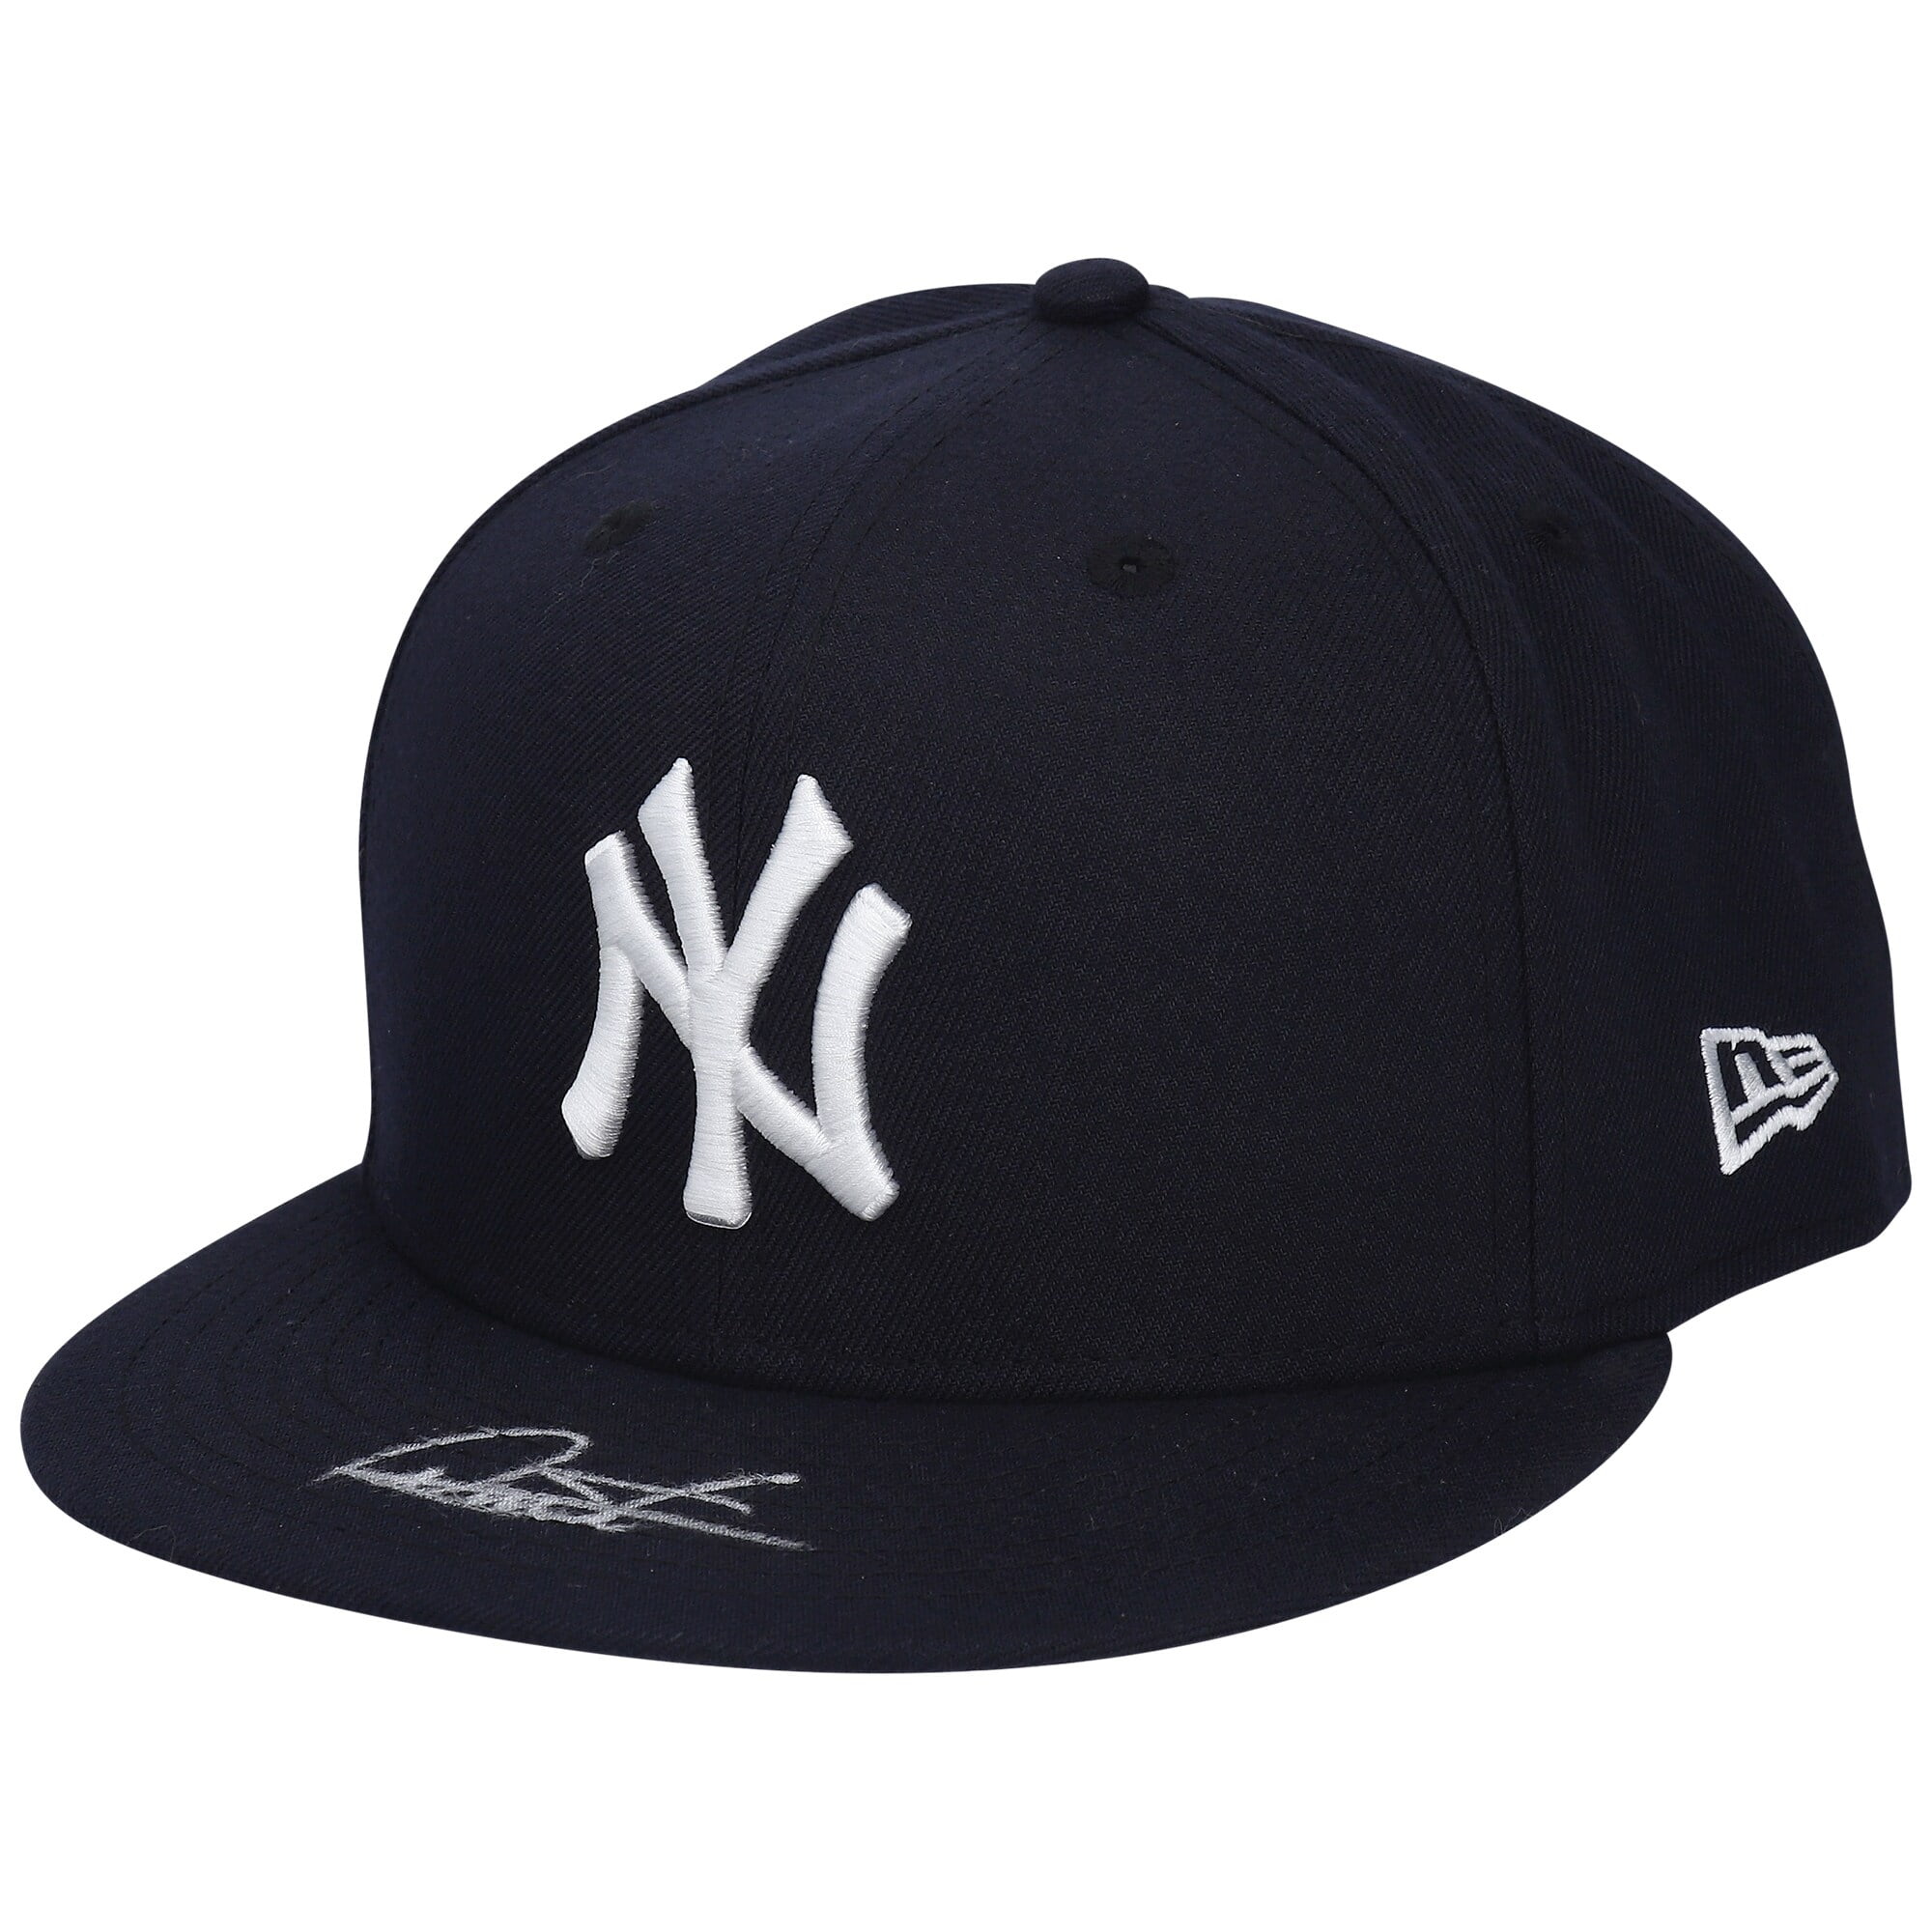 New York Yankees New Era Authentic On-Field 59FIFTY Fitted Cap